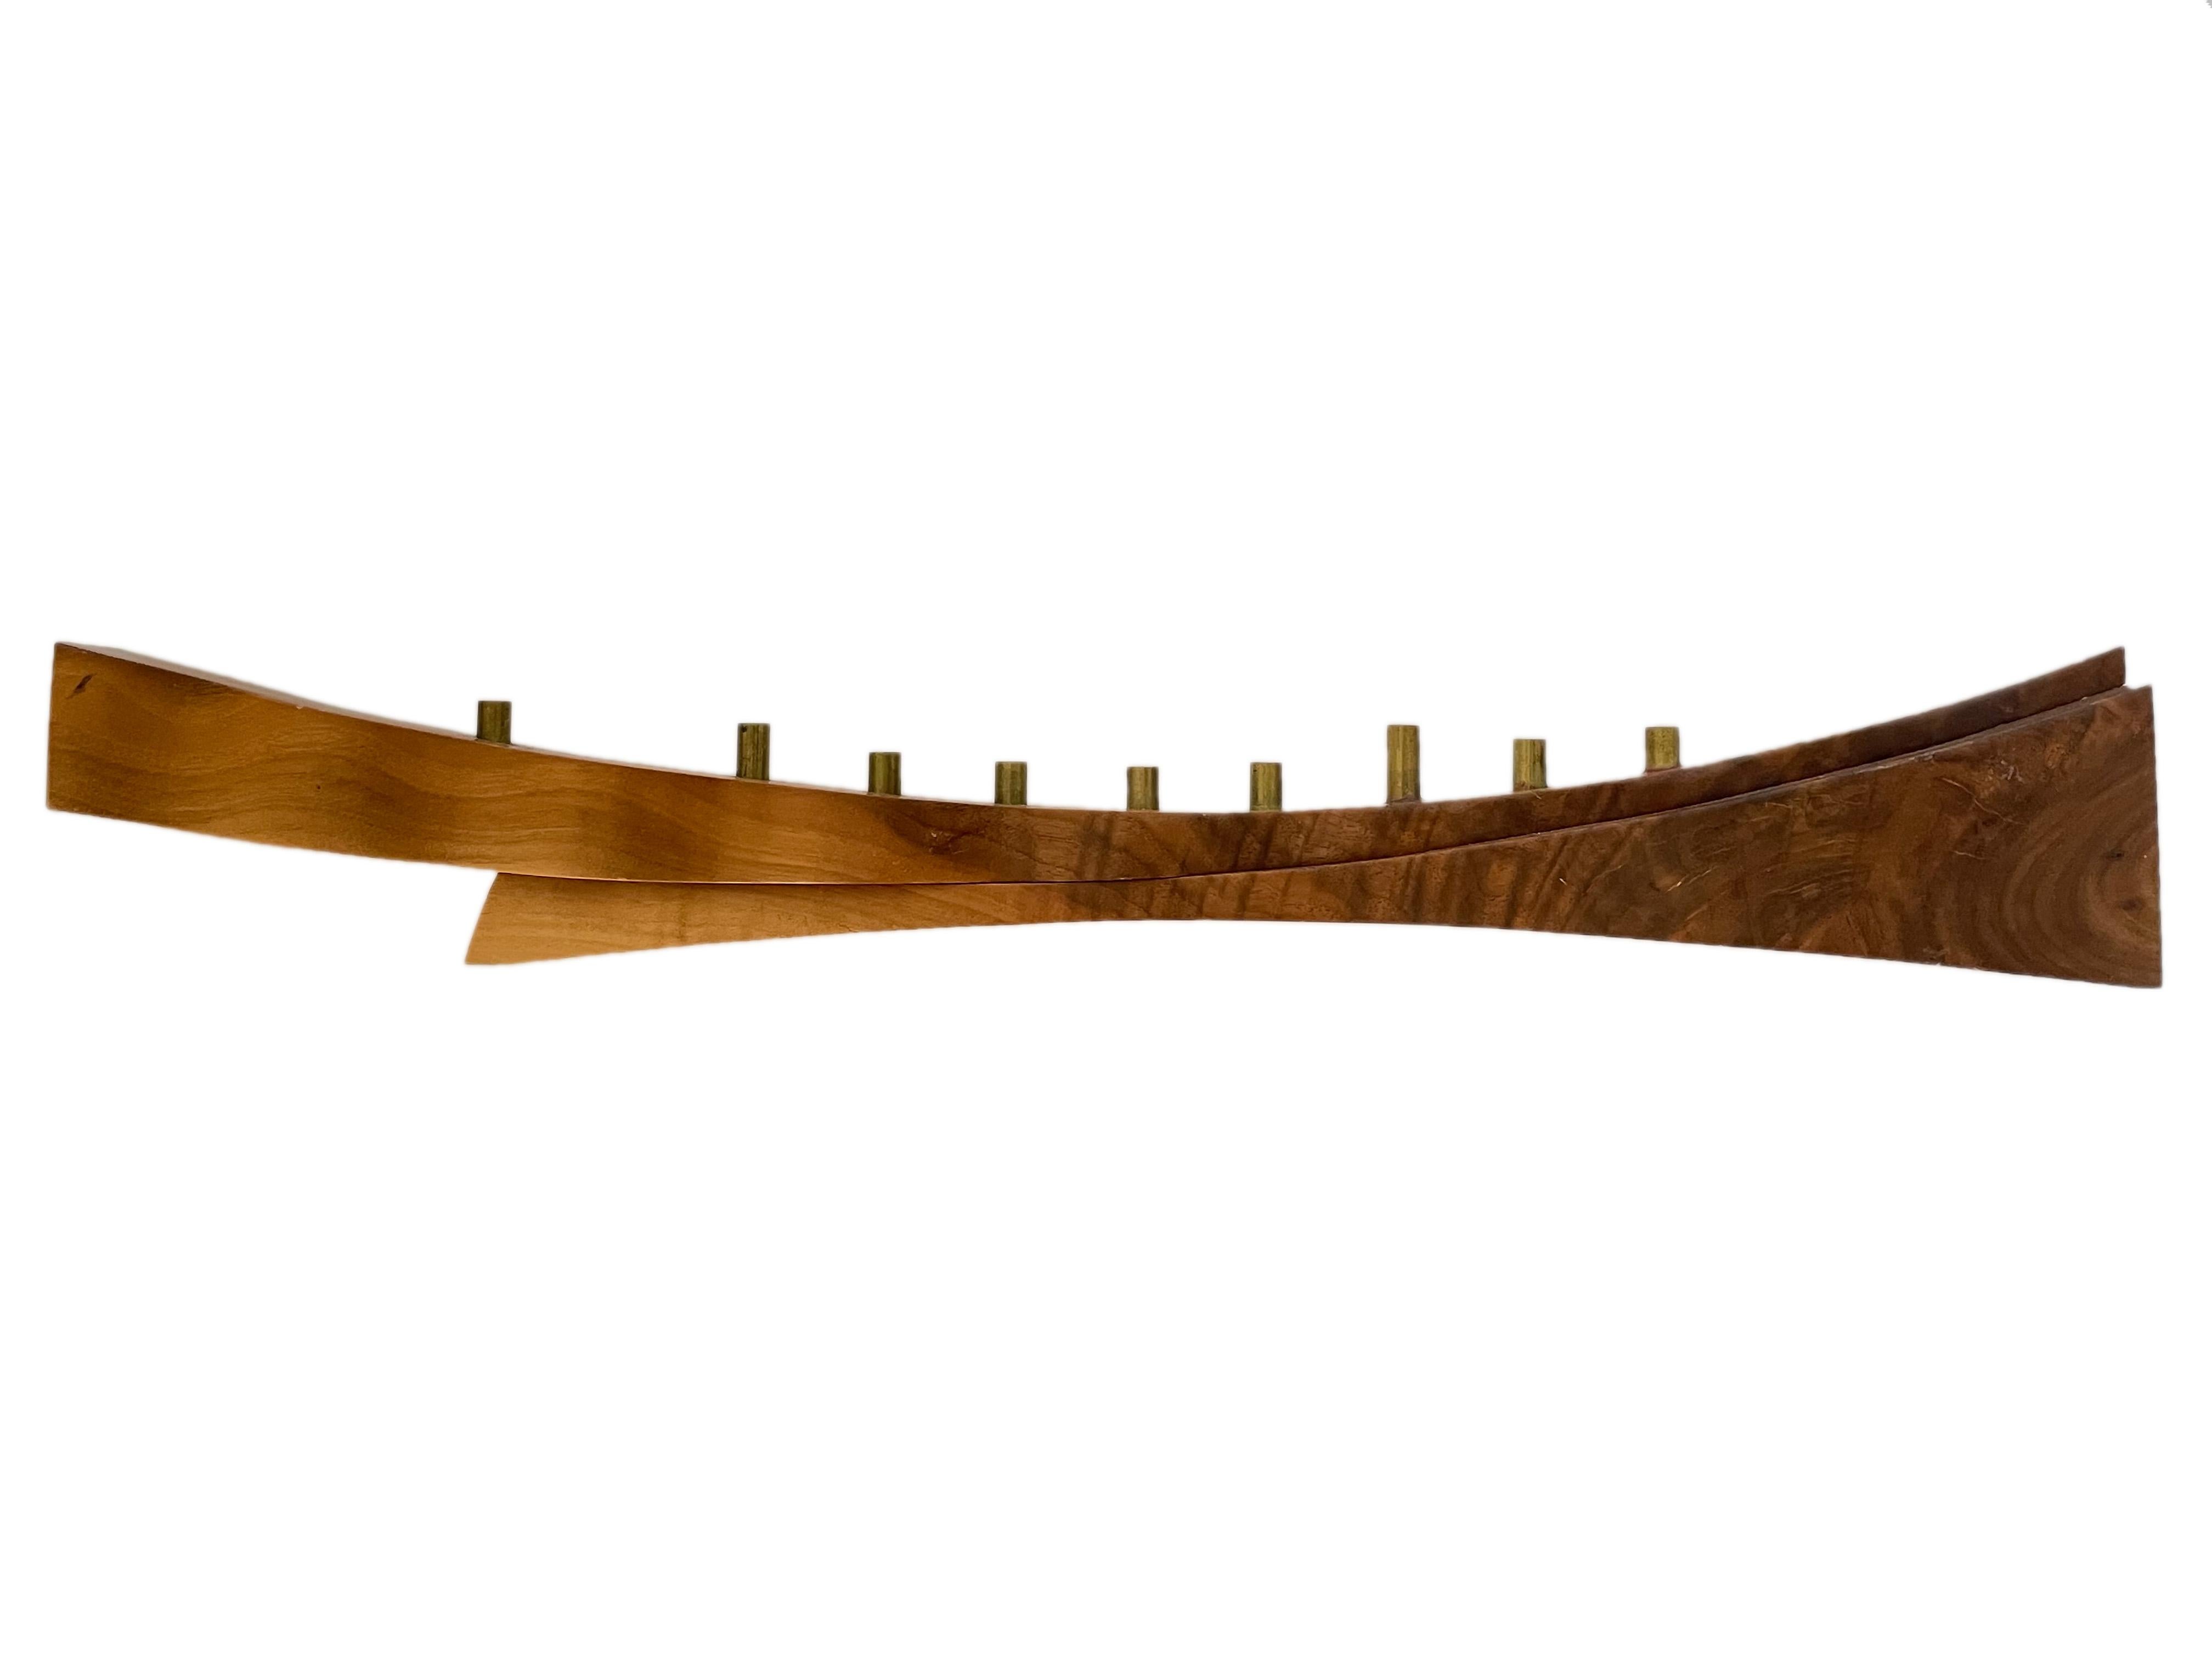 Organic Modern Late 20th Century American Studio Craft Carved Wood Menorah by, Charlie B. Cobb For Sale